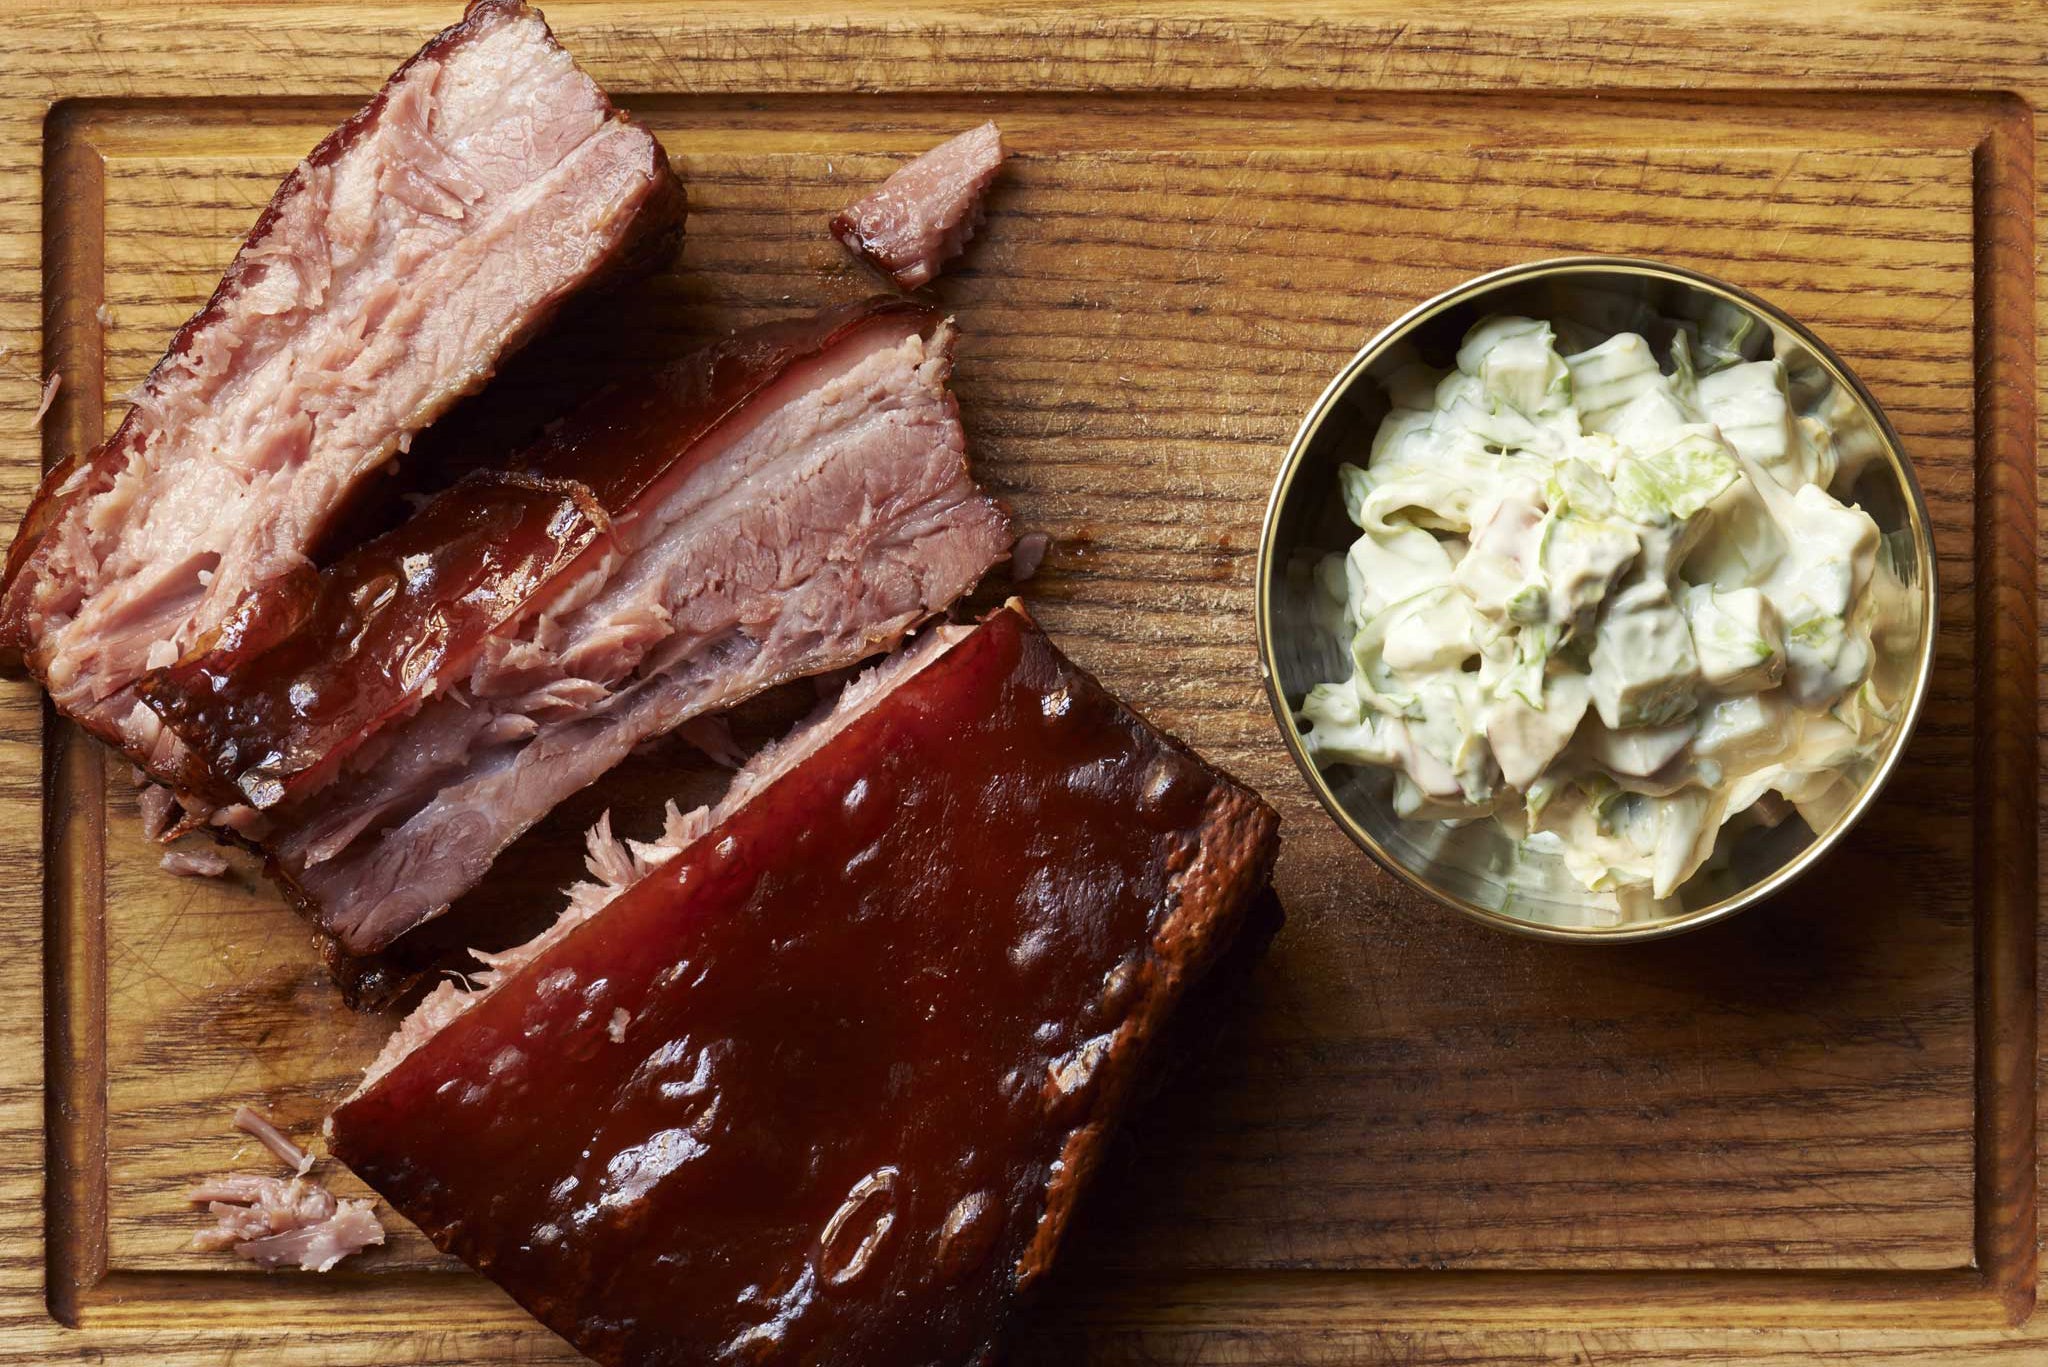 Marks' bacon rib with Waldorf salad is perfect for the summer barbecue season